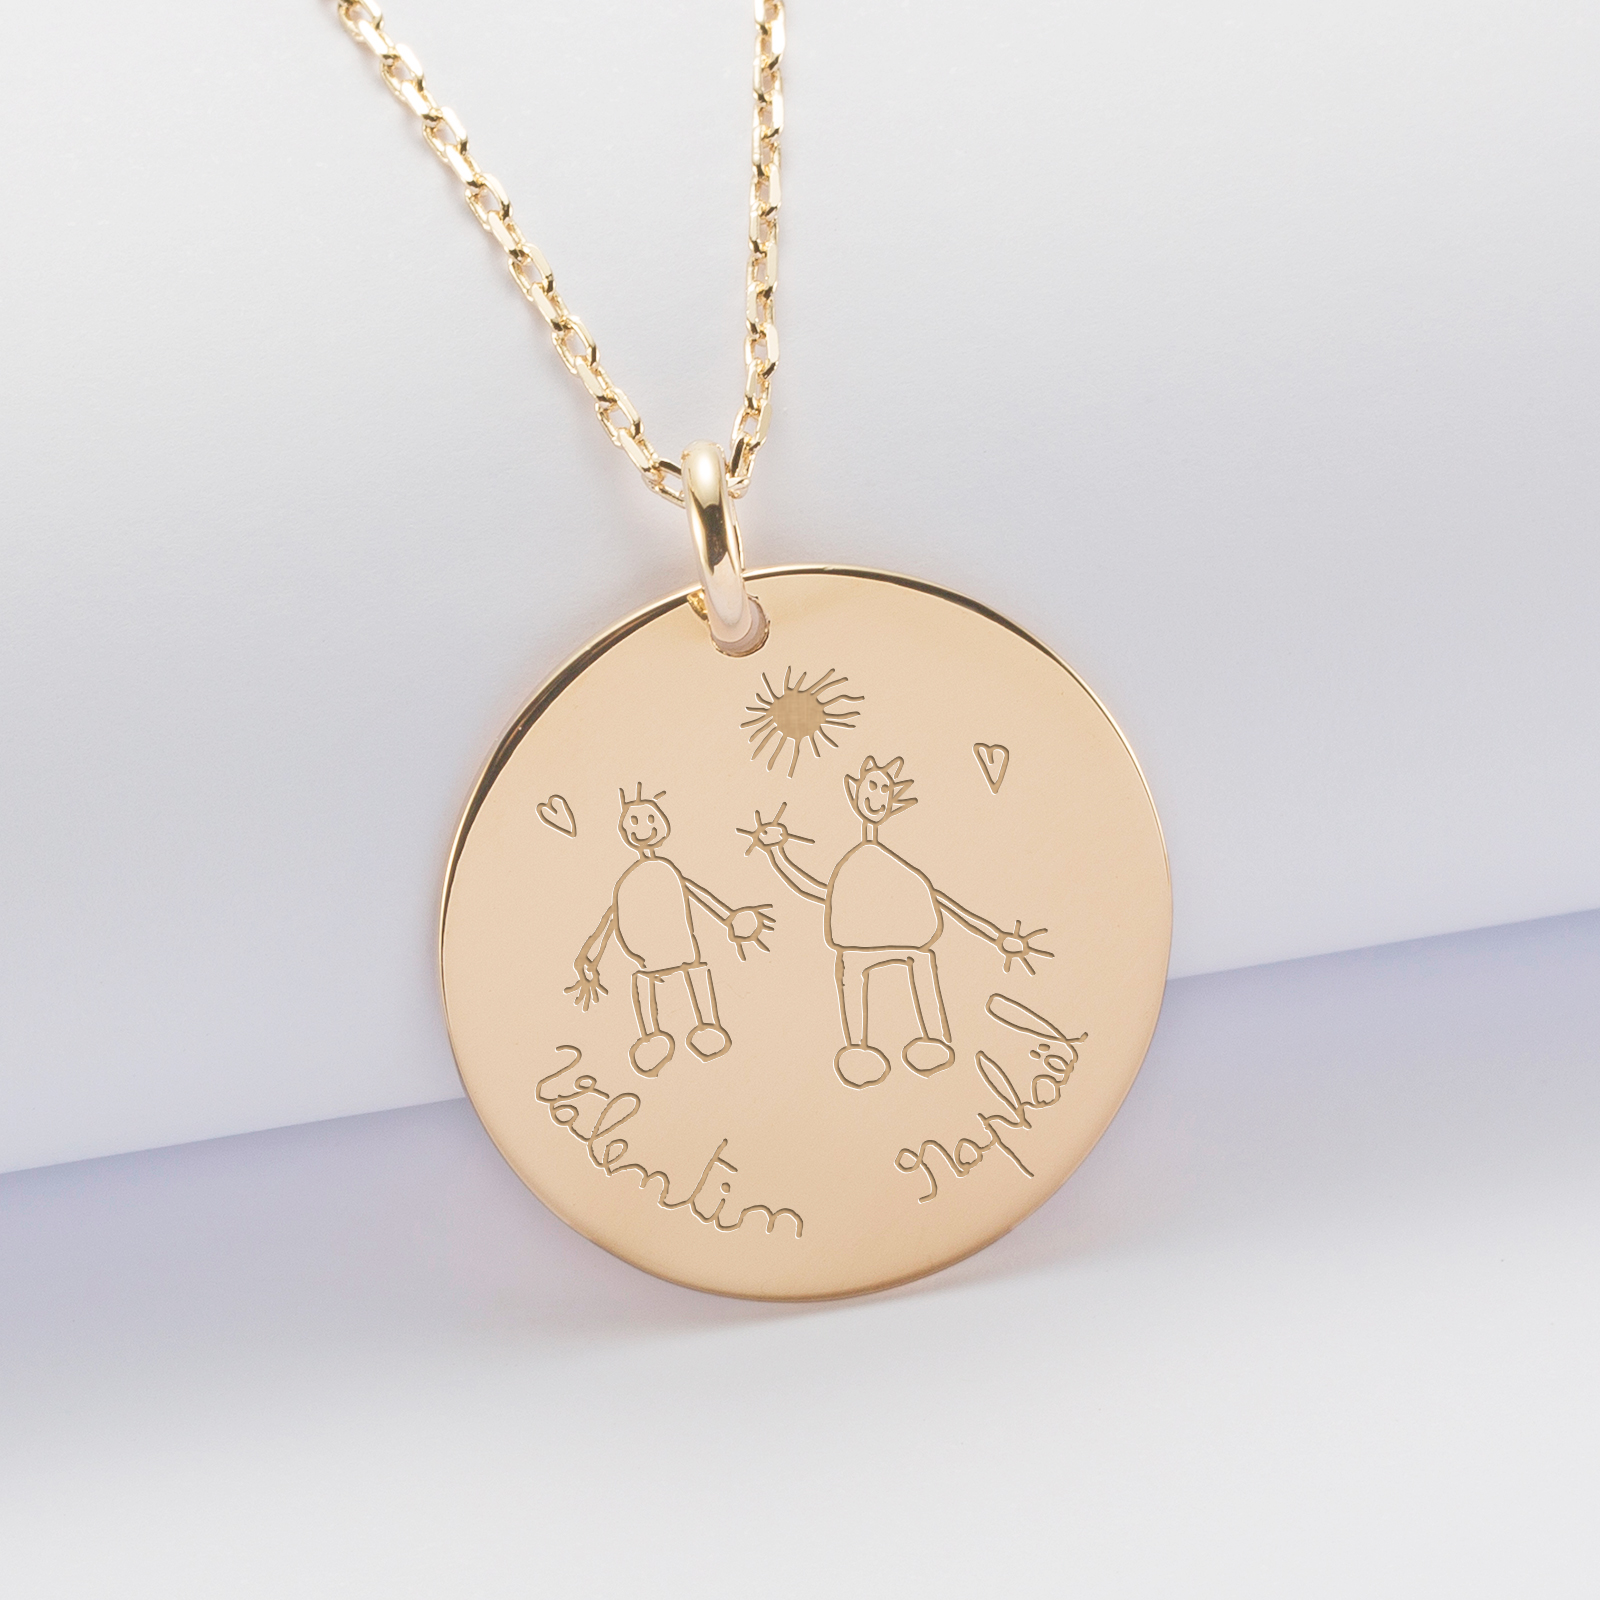 Personalised engraved gold plated medallion pendant 27 mm sketch